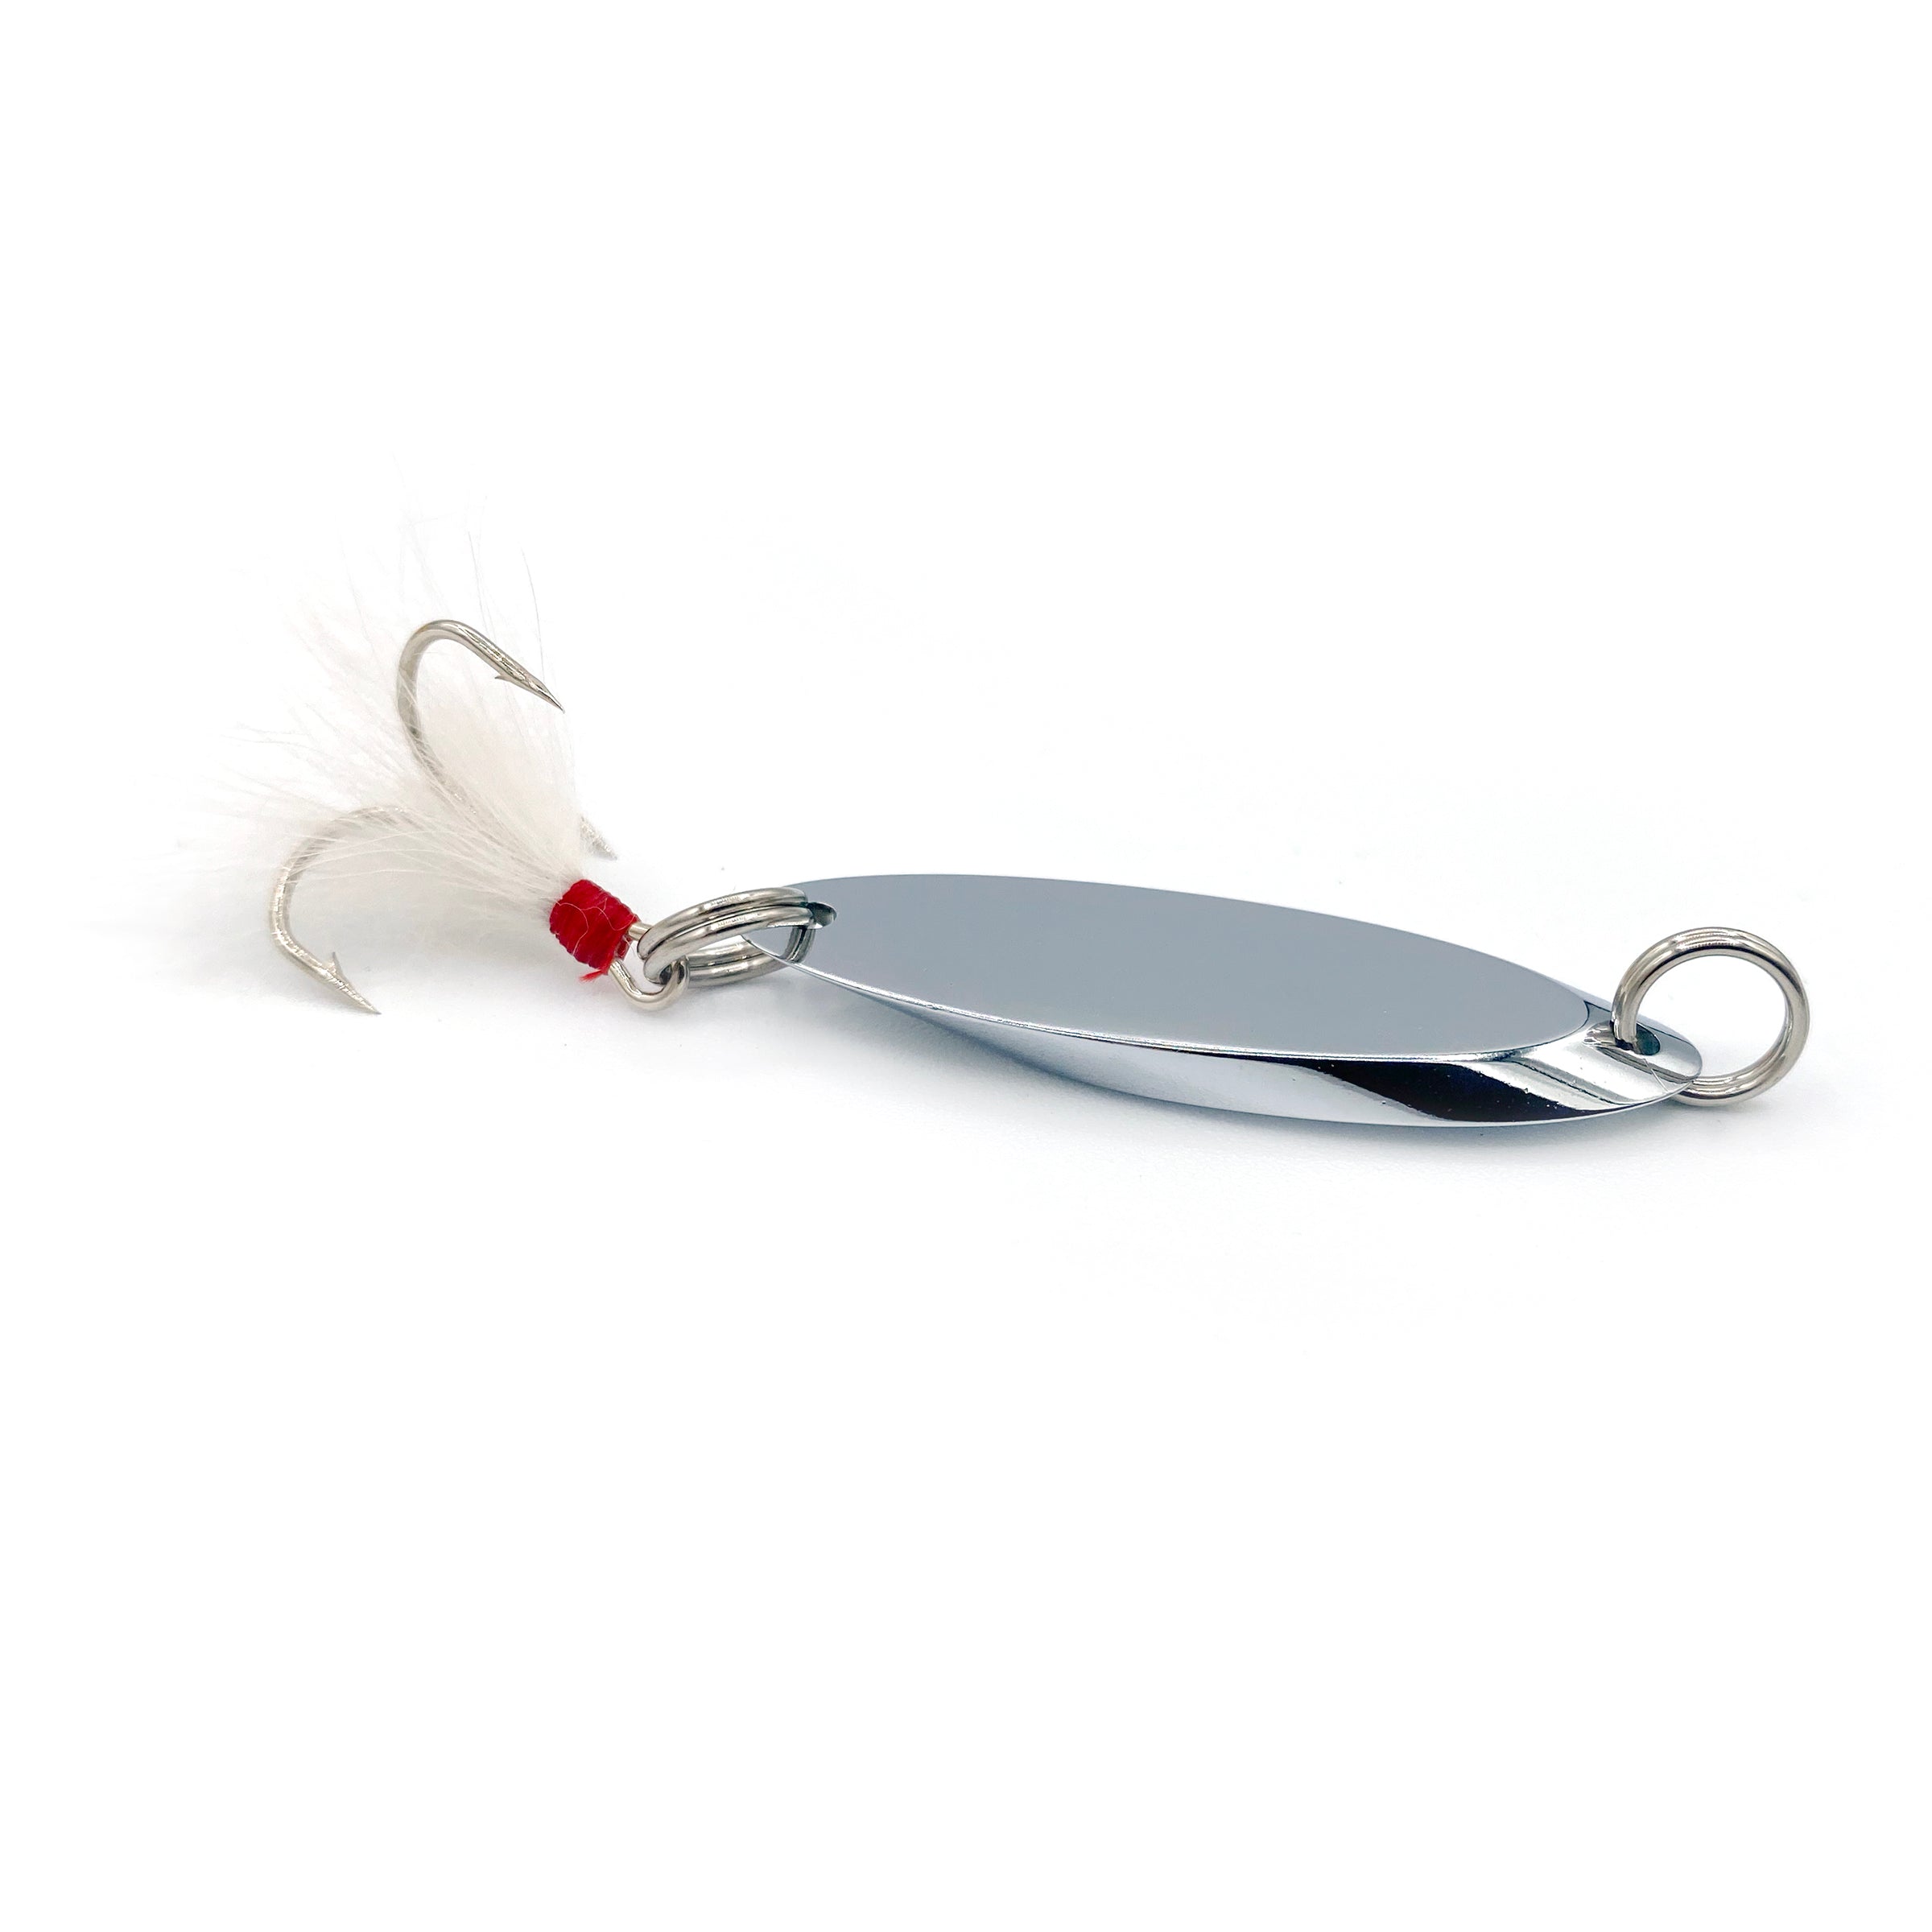 Sea Strike SES75G-1 Gold Plated Casting Spoon with Teaser Tab